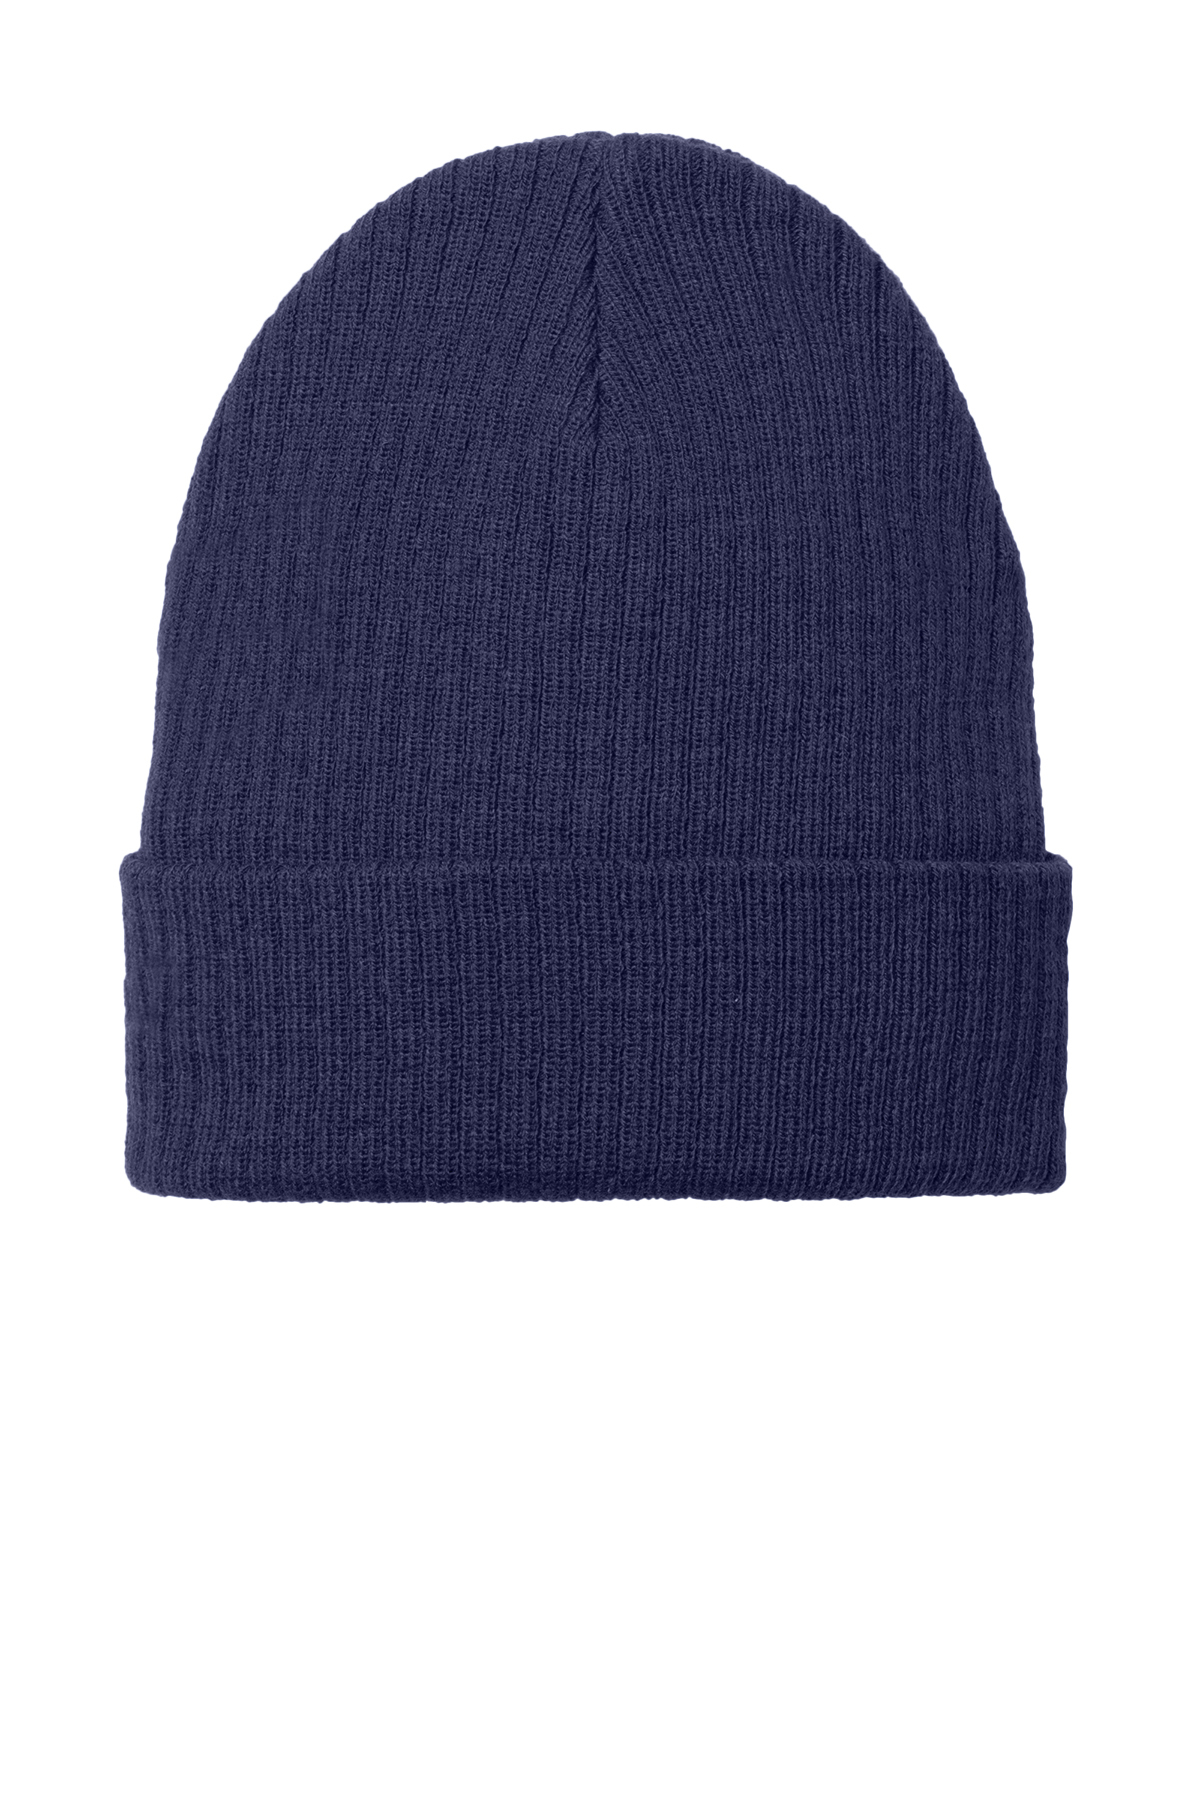 Port Authority C-FREE Recycled Beanie | Product | SanMar